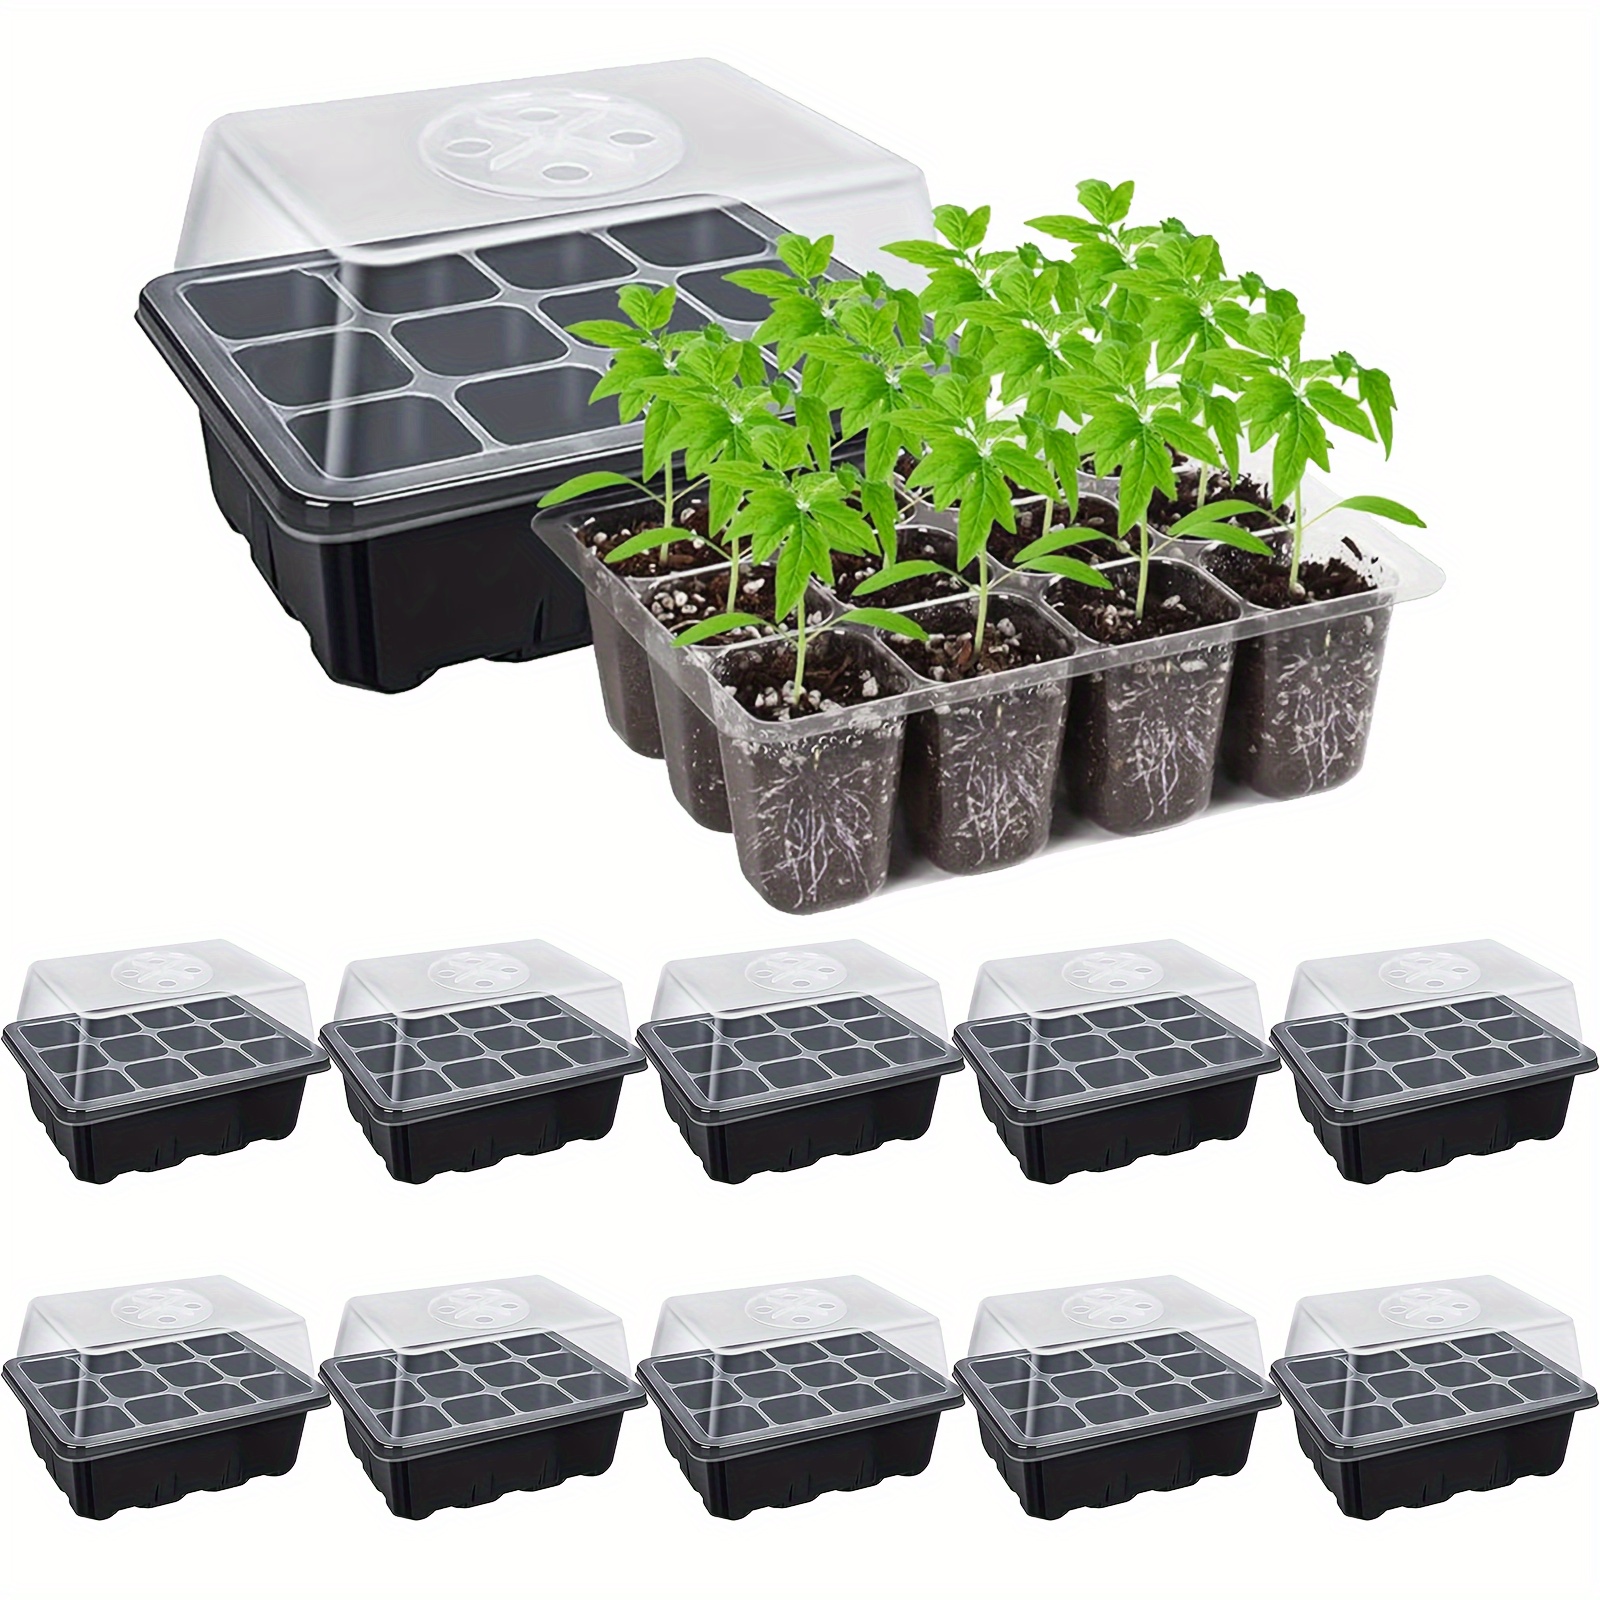 

10 Packs, Seed Starter Tray Seedling Kits,plant Starter Kit With Adjustable Humidity Dome And Base Indoor Greenhouse Mini Propagator For Seeds Growing Starting (12 Cells Per Tray,black)